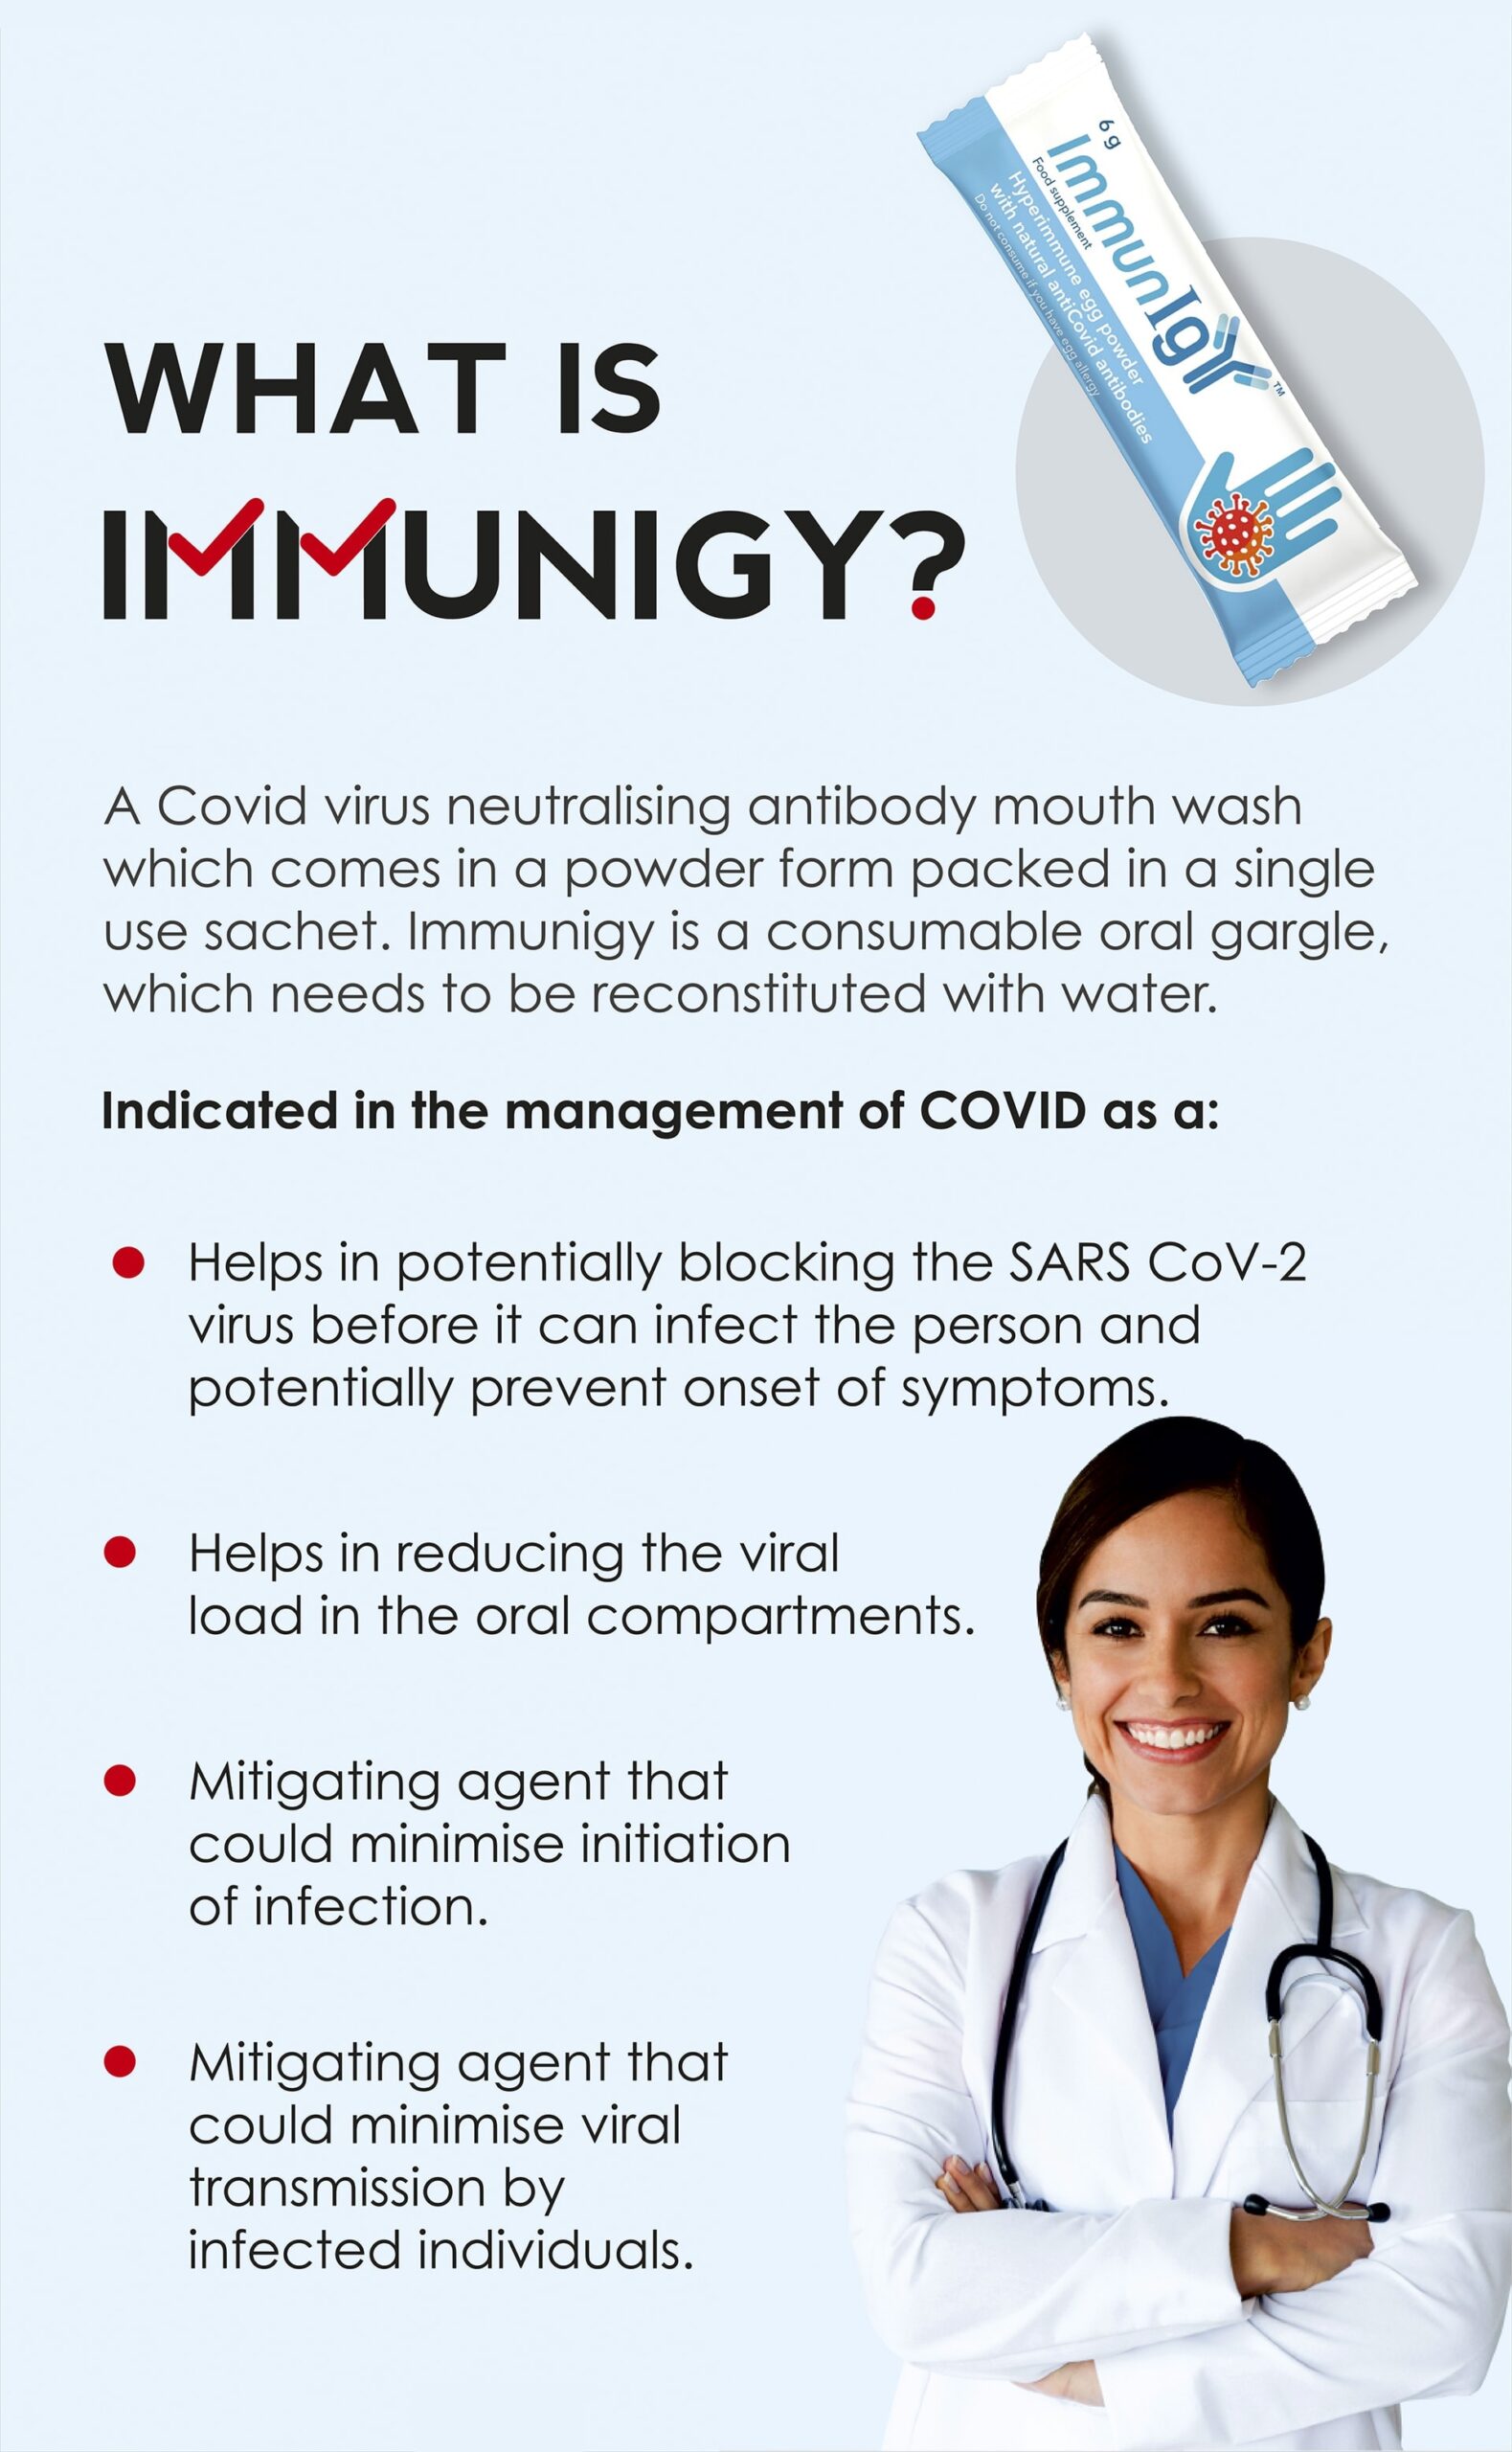 WHAT IS IMMUNIGY? A Covid virus neutralising antibody mouth wash which comes in a powder form packed in a single use sachet. Immunigy is a consumable oral gargle, which needs to be reconstituted with water. Indicated in the management of COVID: Helps in potentially blocking the SARS CoV-2 virus before it can infect the person and potentially prevent onset of symptoms. Helps in reducing the viral load in the oral compartments. Mitigating agent that could minimise initiation of infection. Mitigating agent that could minimise viral transmission by infected individuals.